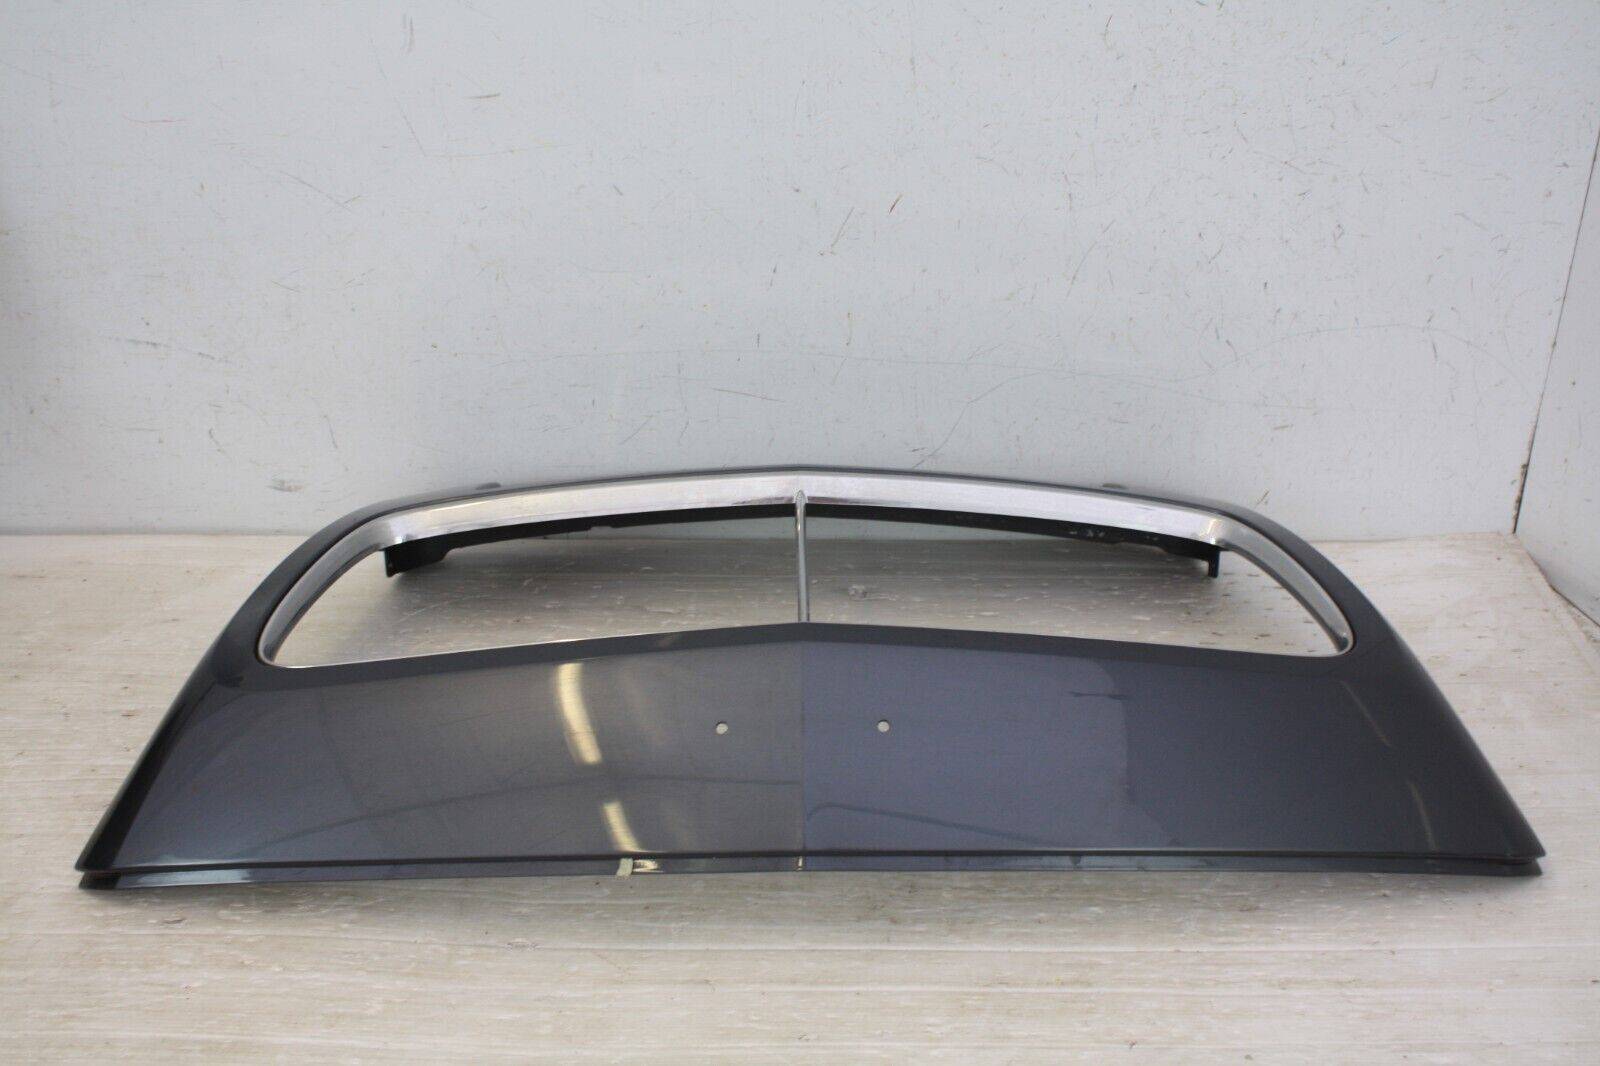 Bentley-Continental-GT-GTC-Front-Grill-Surround-3W3853653-Genuine-2011-175913121734-5